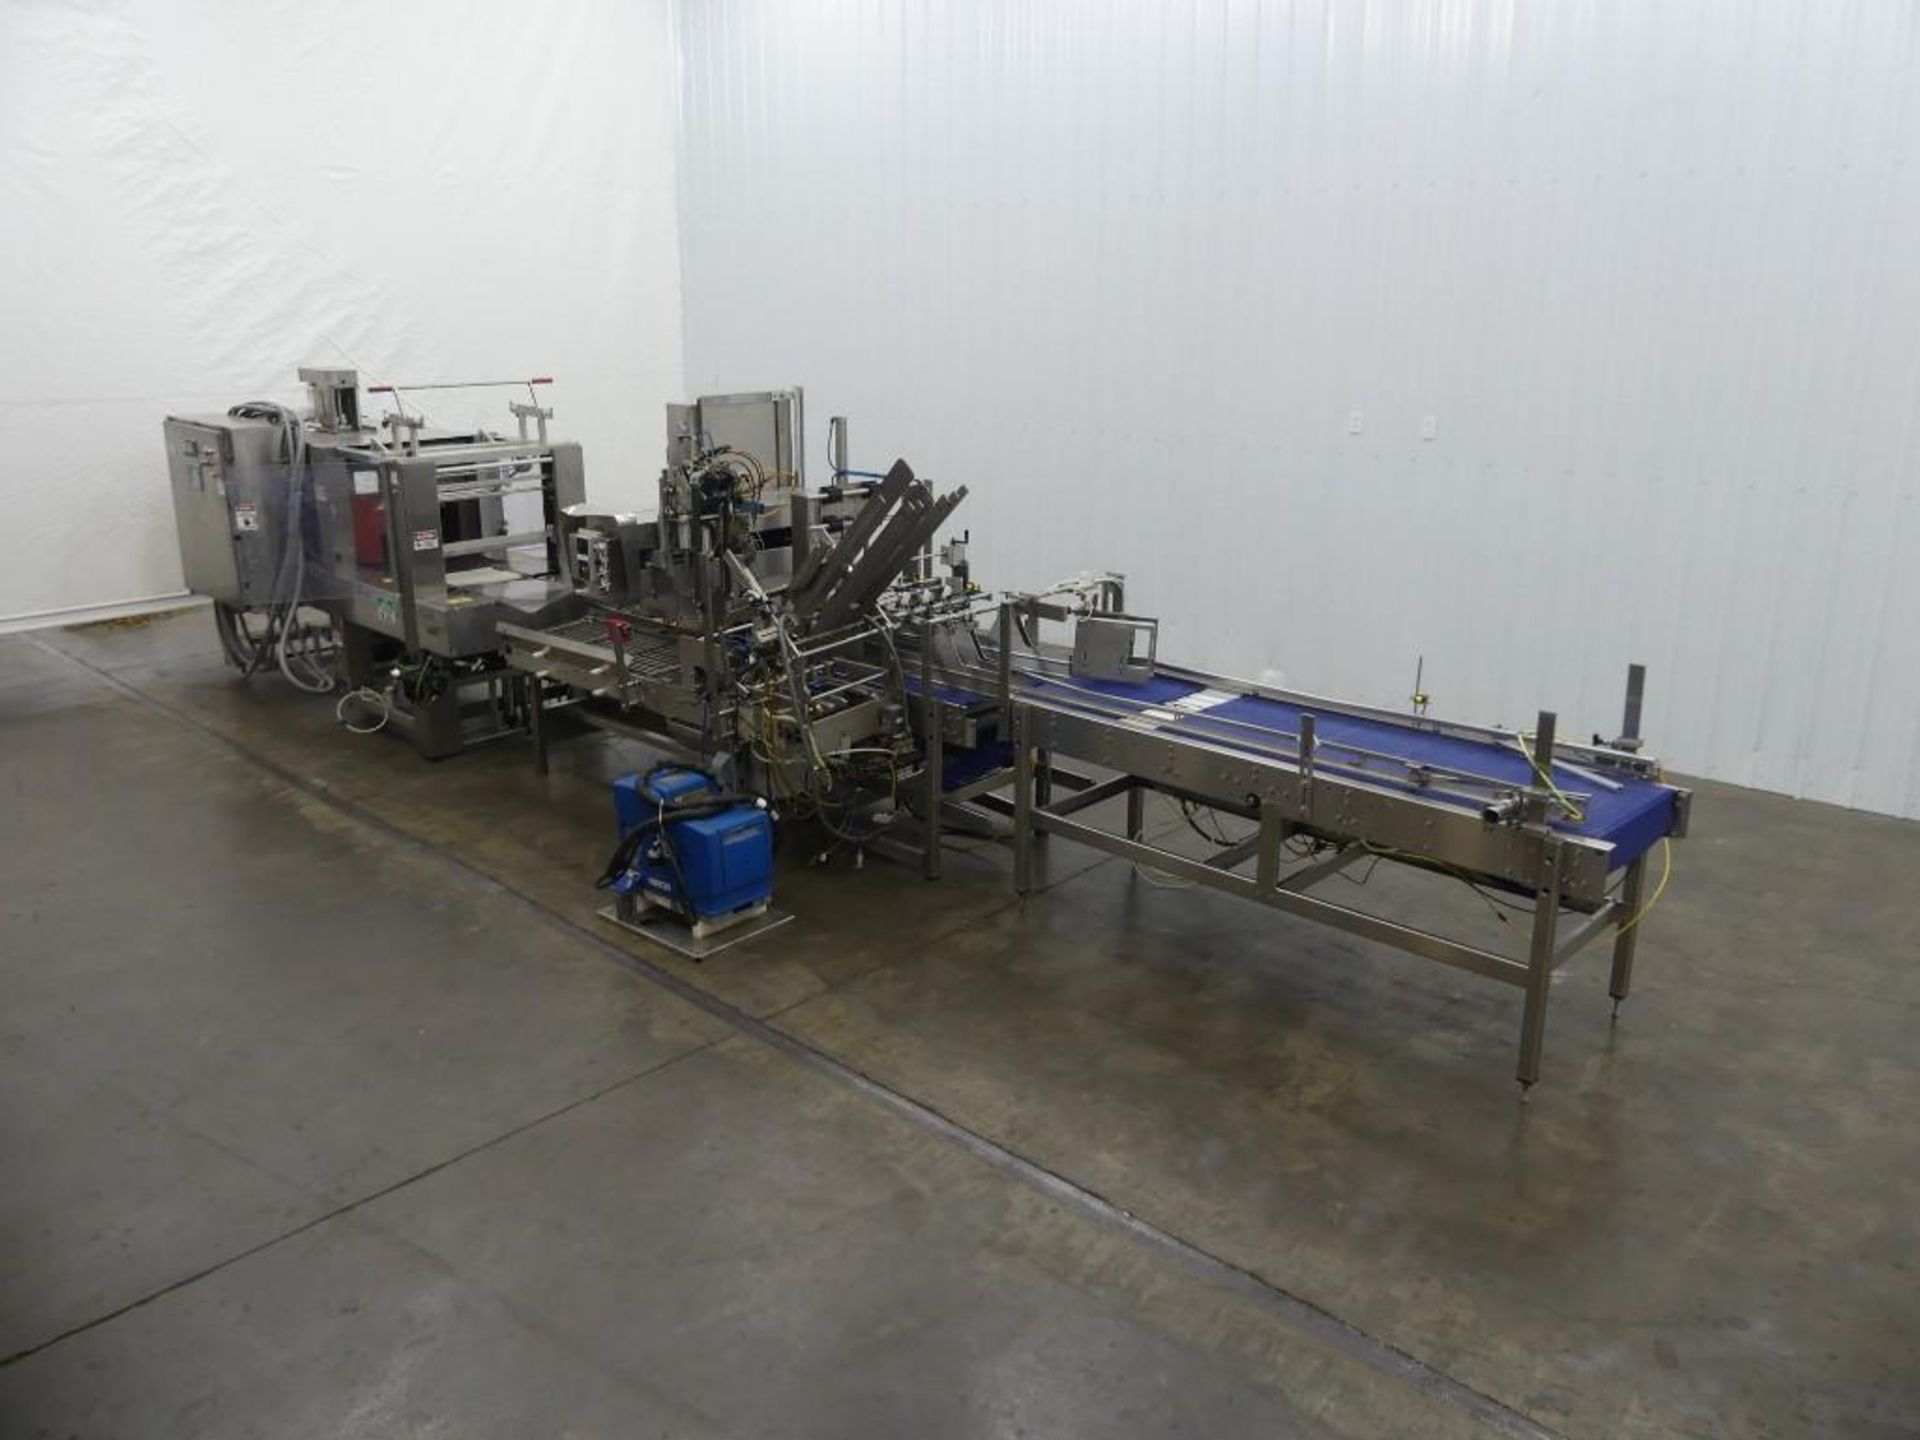 Arpac Delkor Spot-Pak 112-SS-24 Automatic Stainless Steel Shrink Bundler - Image 2 of 101